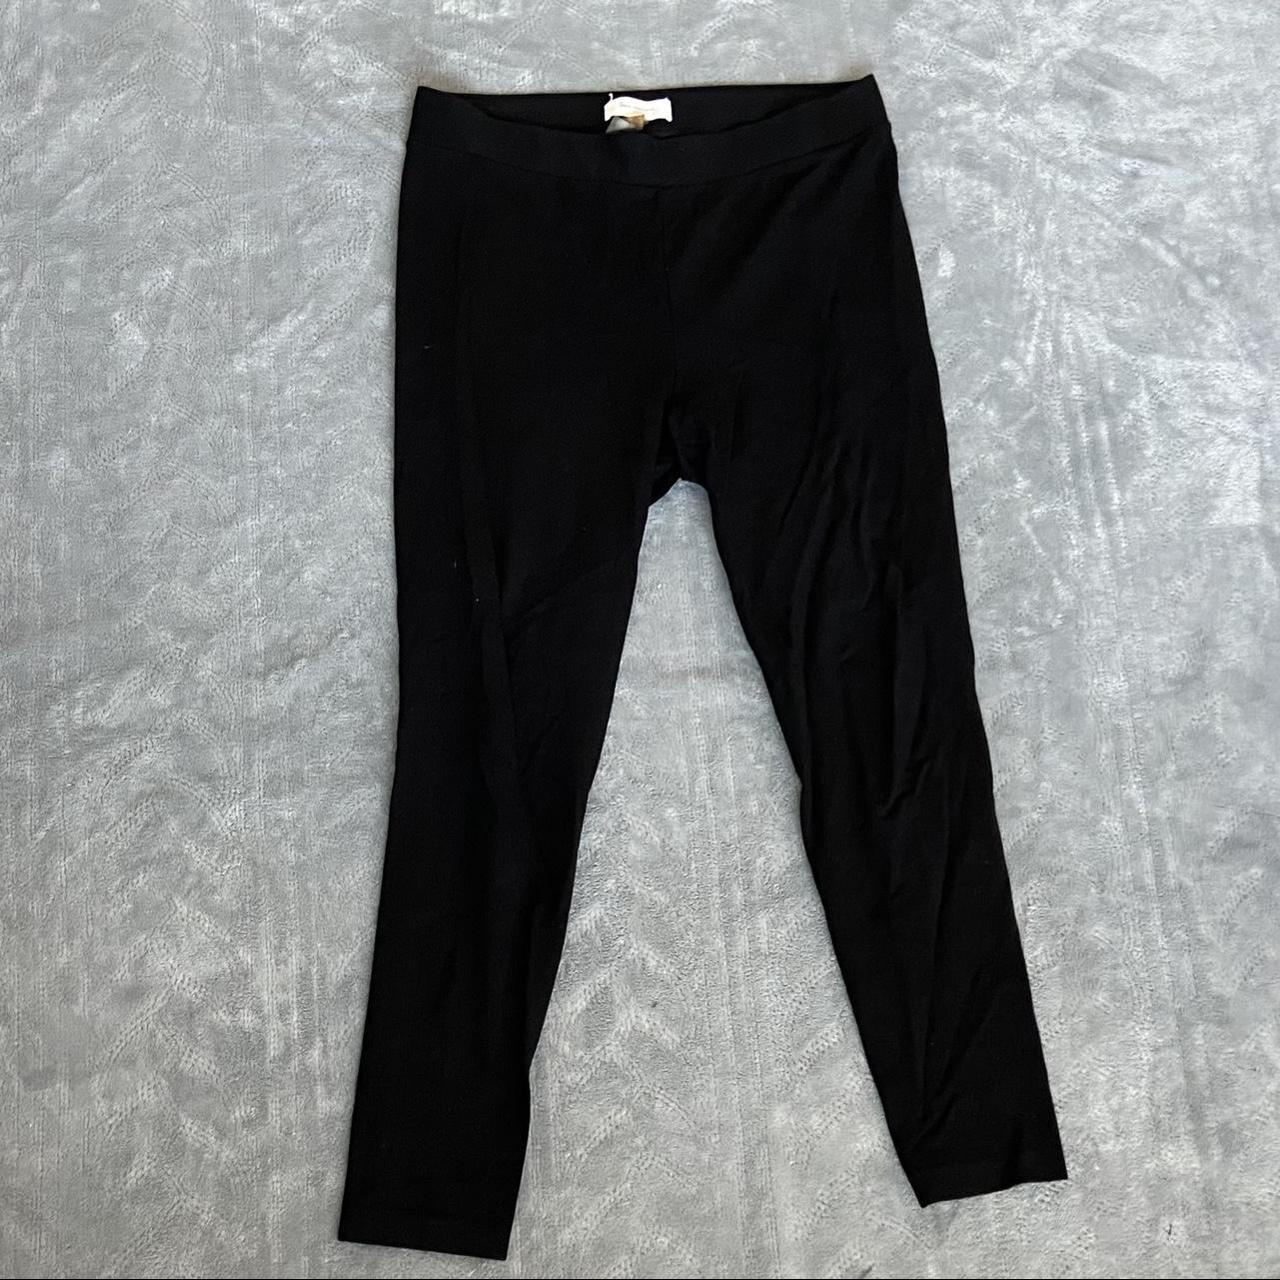 Vince Camuto Leggings Thick high waisted black... - Depop